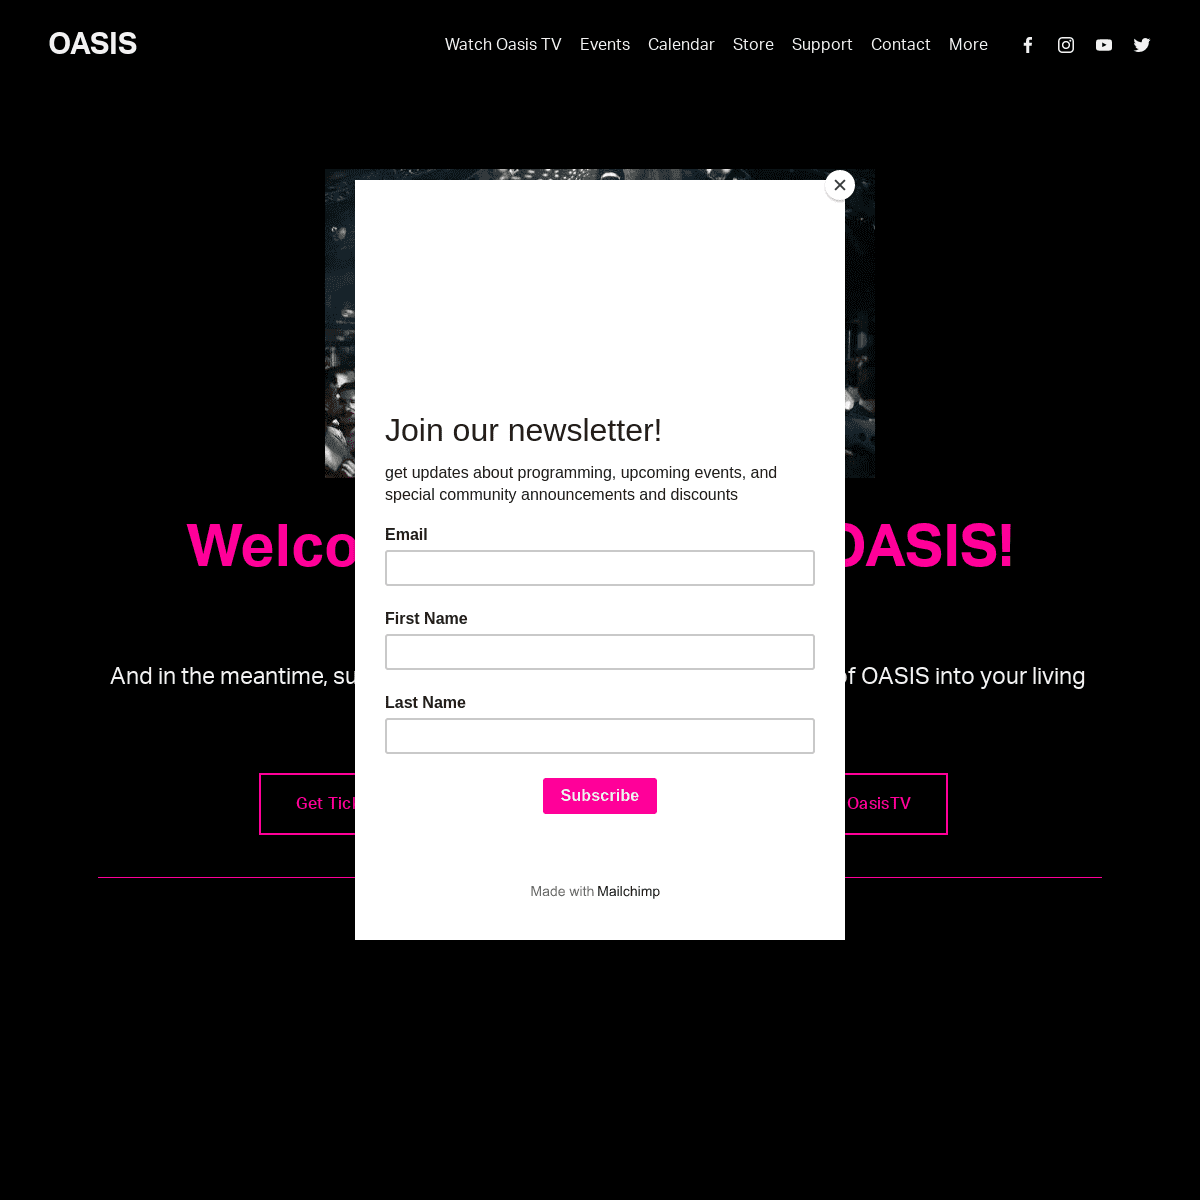 A complete backup of https://sfoasis.com